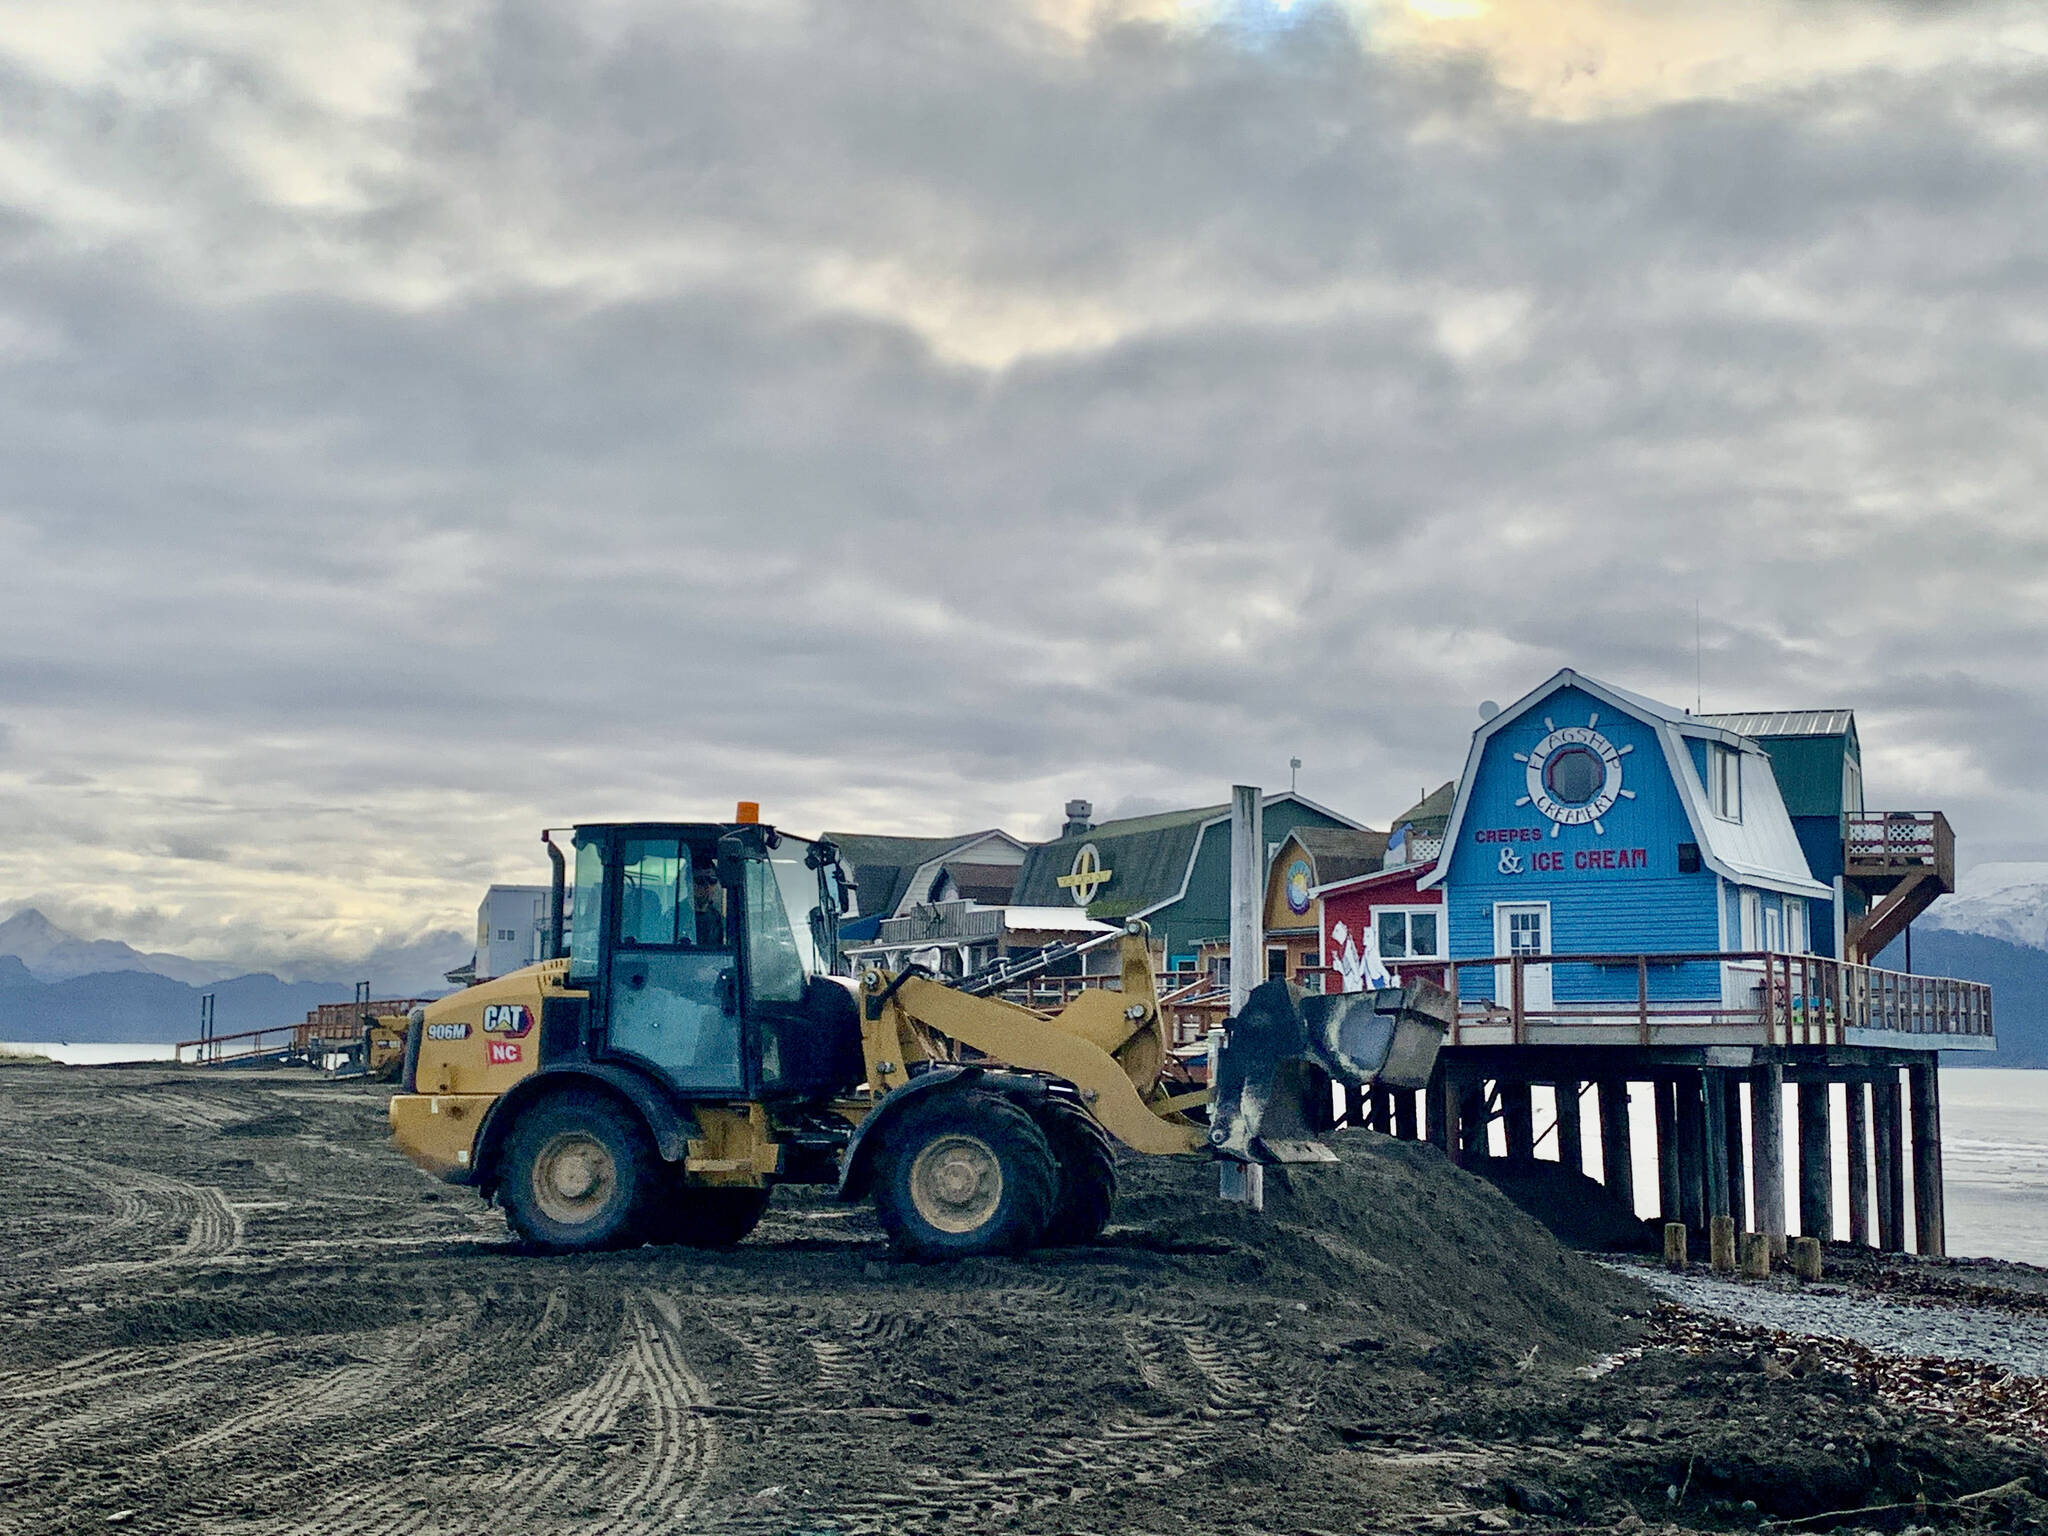 Collins Construction workers rebuild soil damaged during Sunday’s storm, paid by private businesses on the boardwalk, with material coming from the City dredge pile free of charge, Oct. 11, 2022. (Photo by Christina Whiting/Homer News)